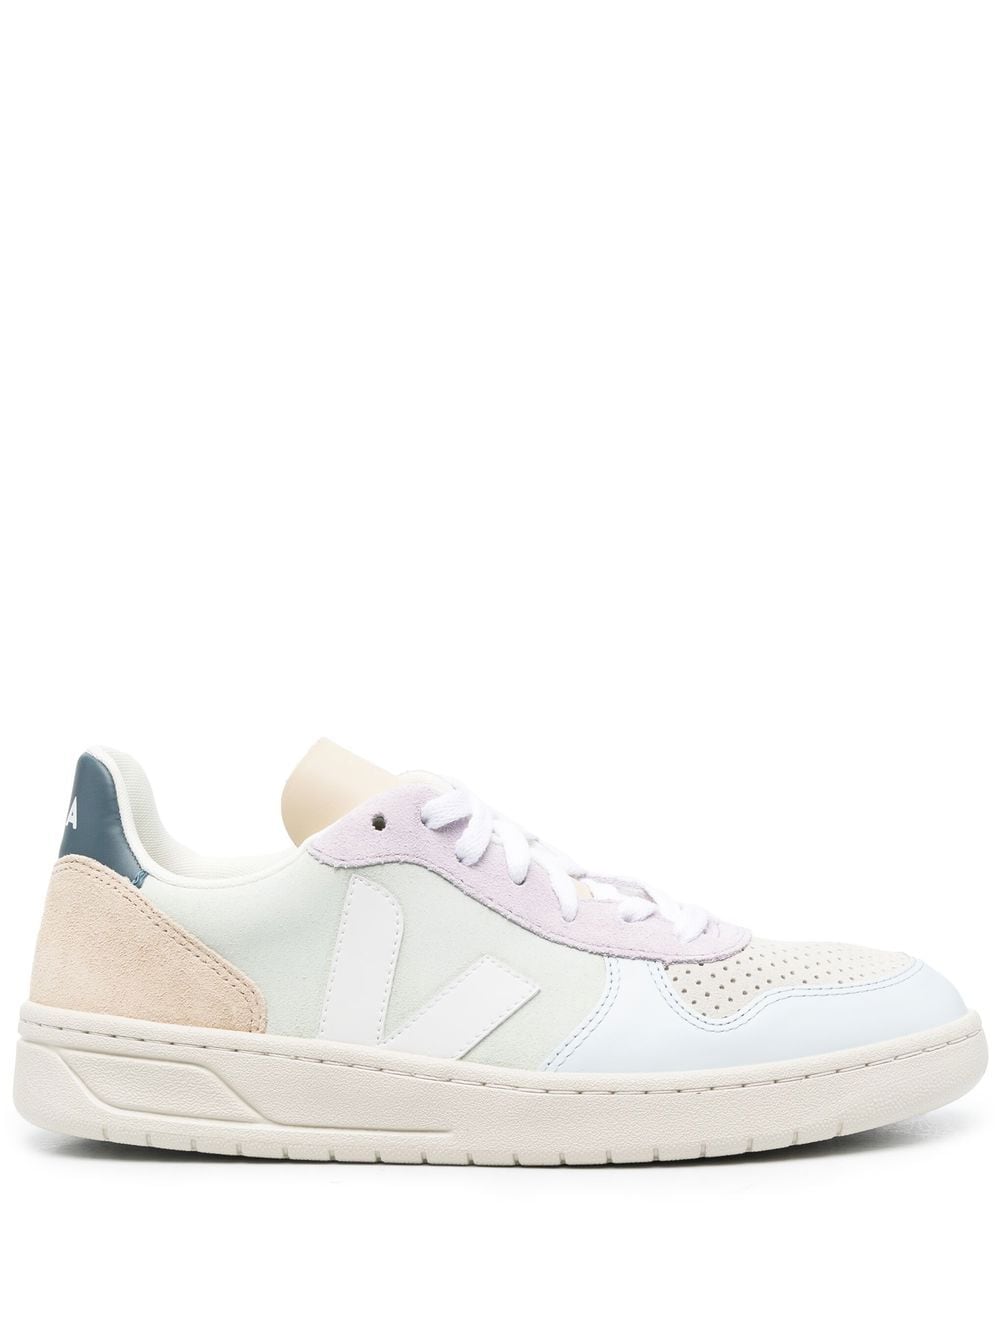 paneled-design leather sneakers